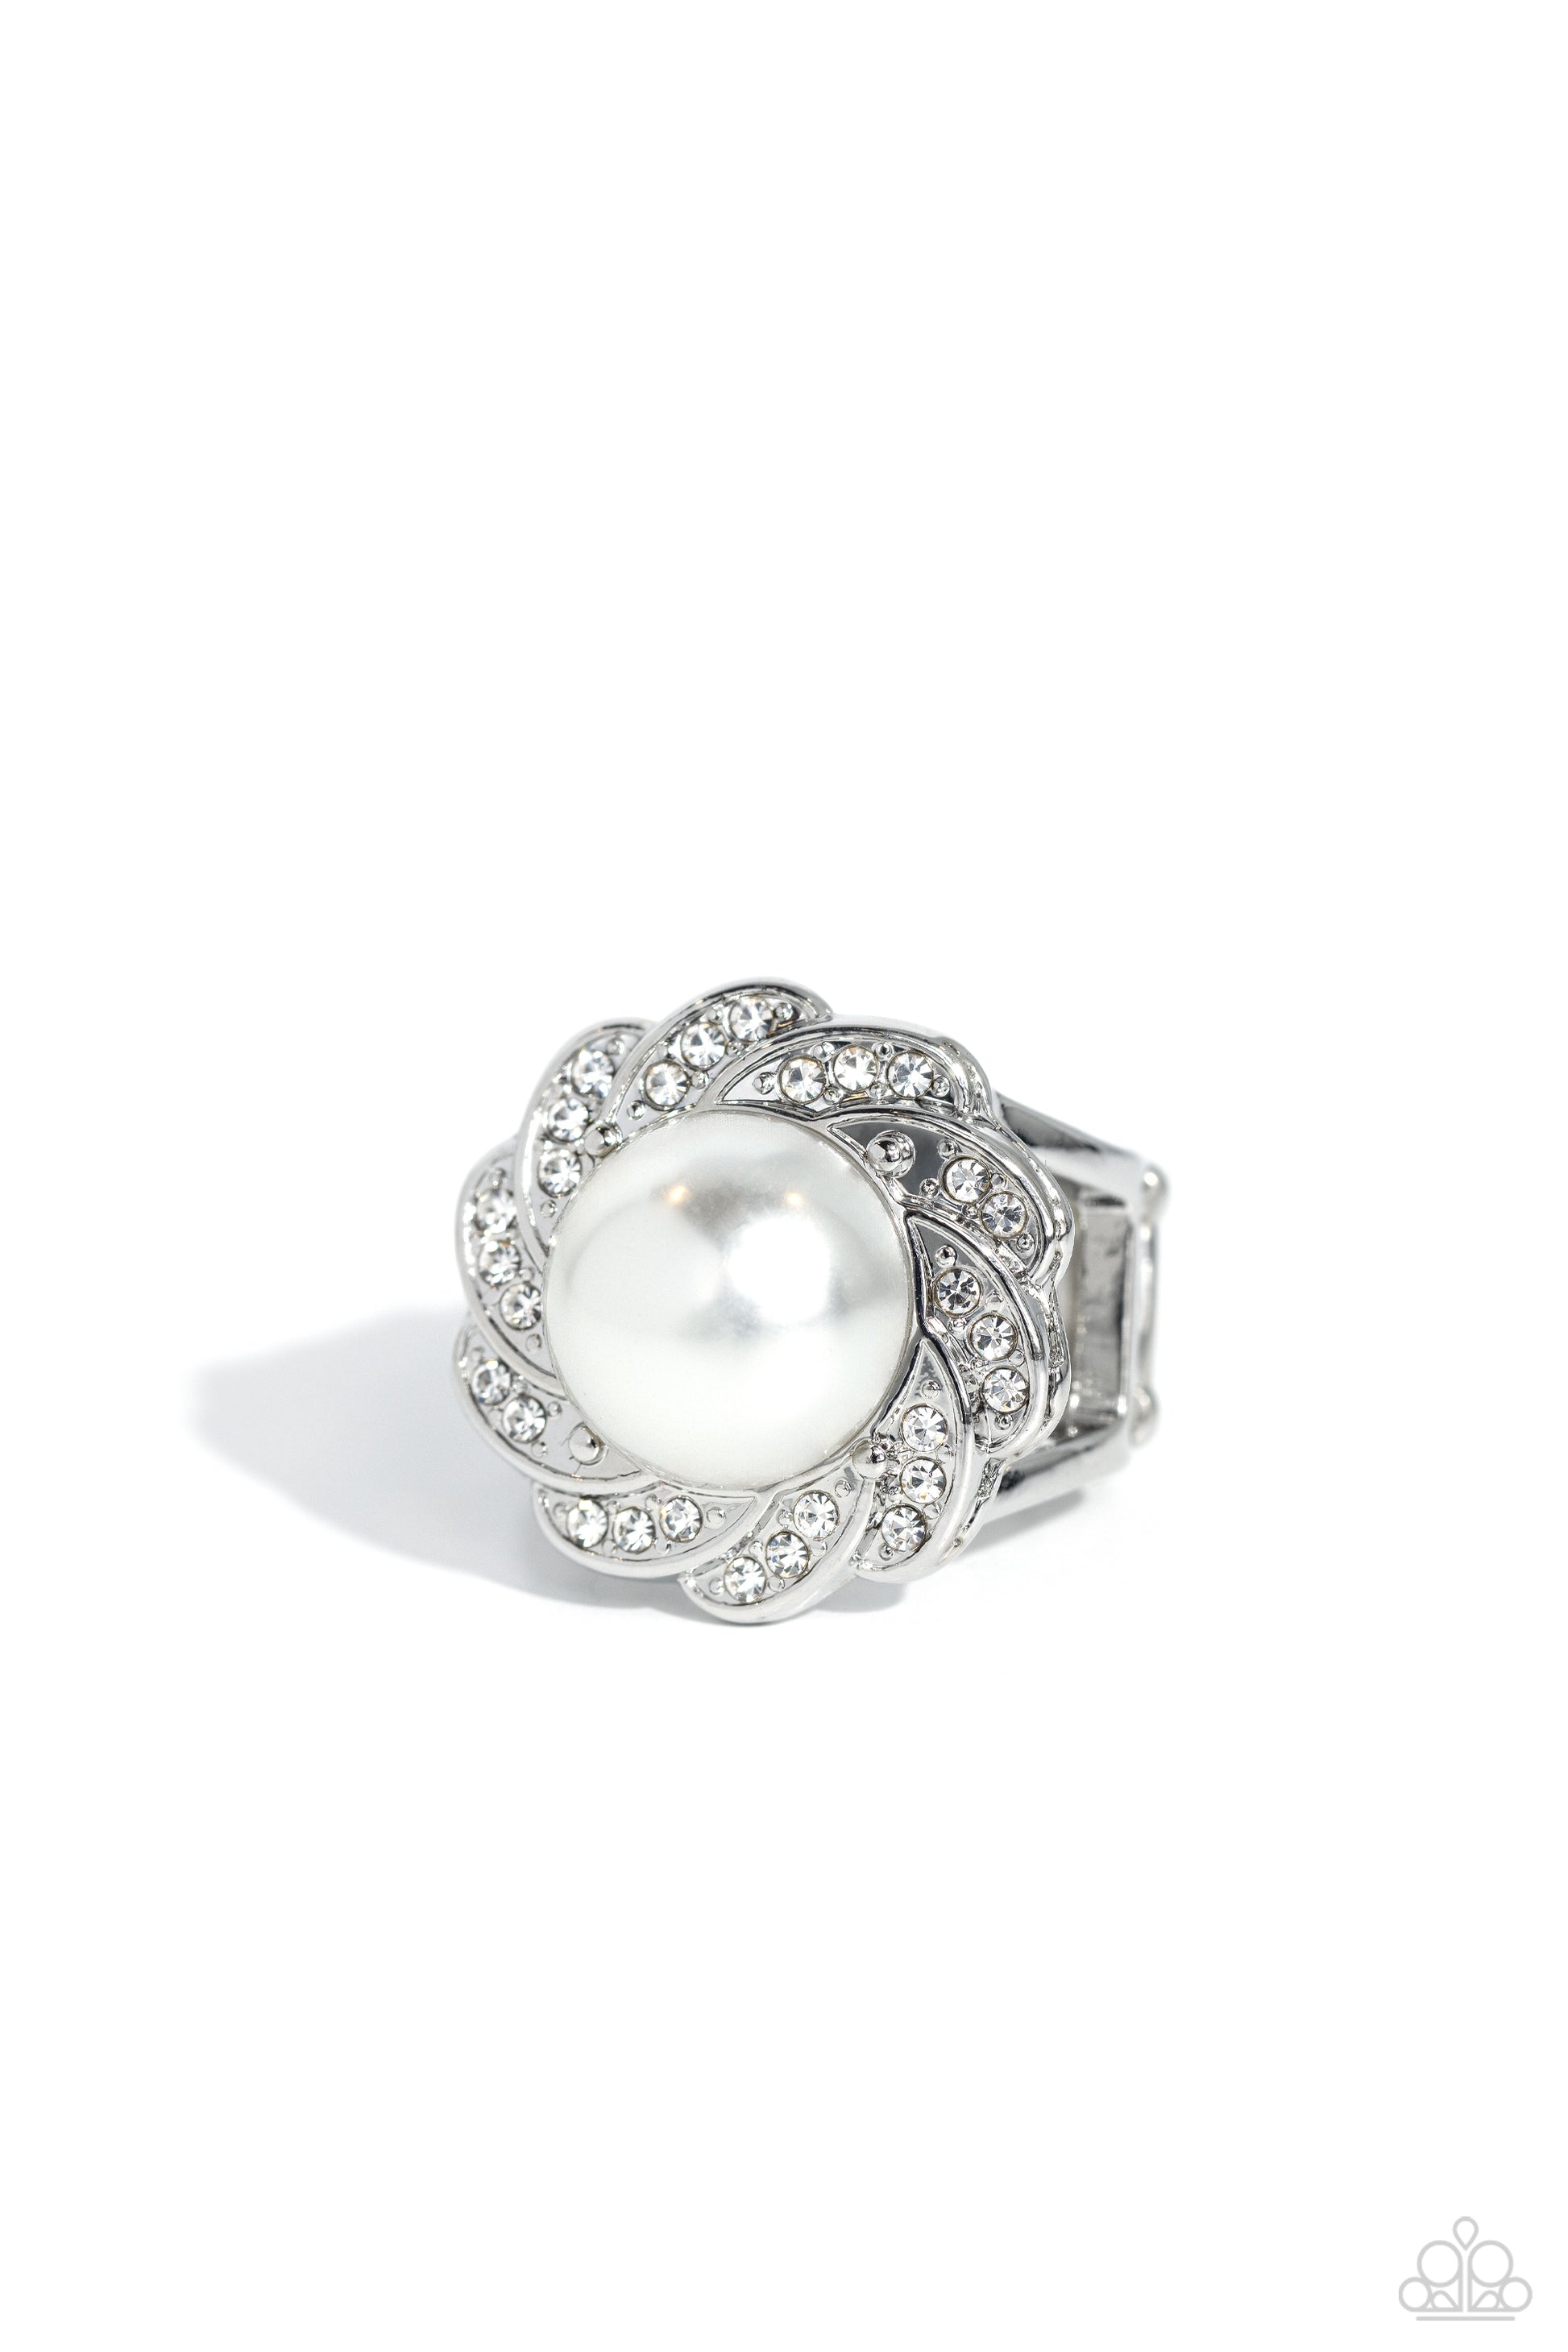 <p data-mce-fragment="1">Paparazzi Accessories - Storybook Ending - White Rings a whirl of white rhinestone encrusted silver petals blooms from a dramatically oversized white pearl drop center, culminating in an elegant floral centerpiece atop the finger. Features a stretchy band for a flexible fit.</p> <p data-mce-fragment="1"><i data-mce-fragment="1">Sold as one individual ring.</i></p>